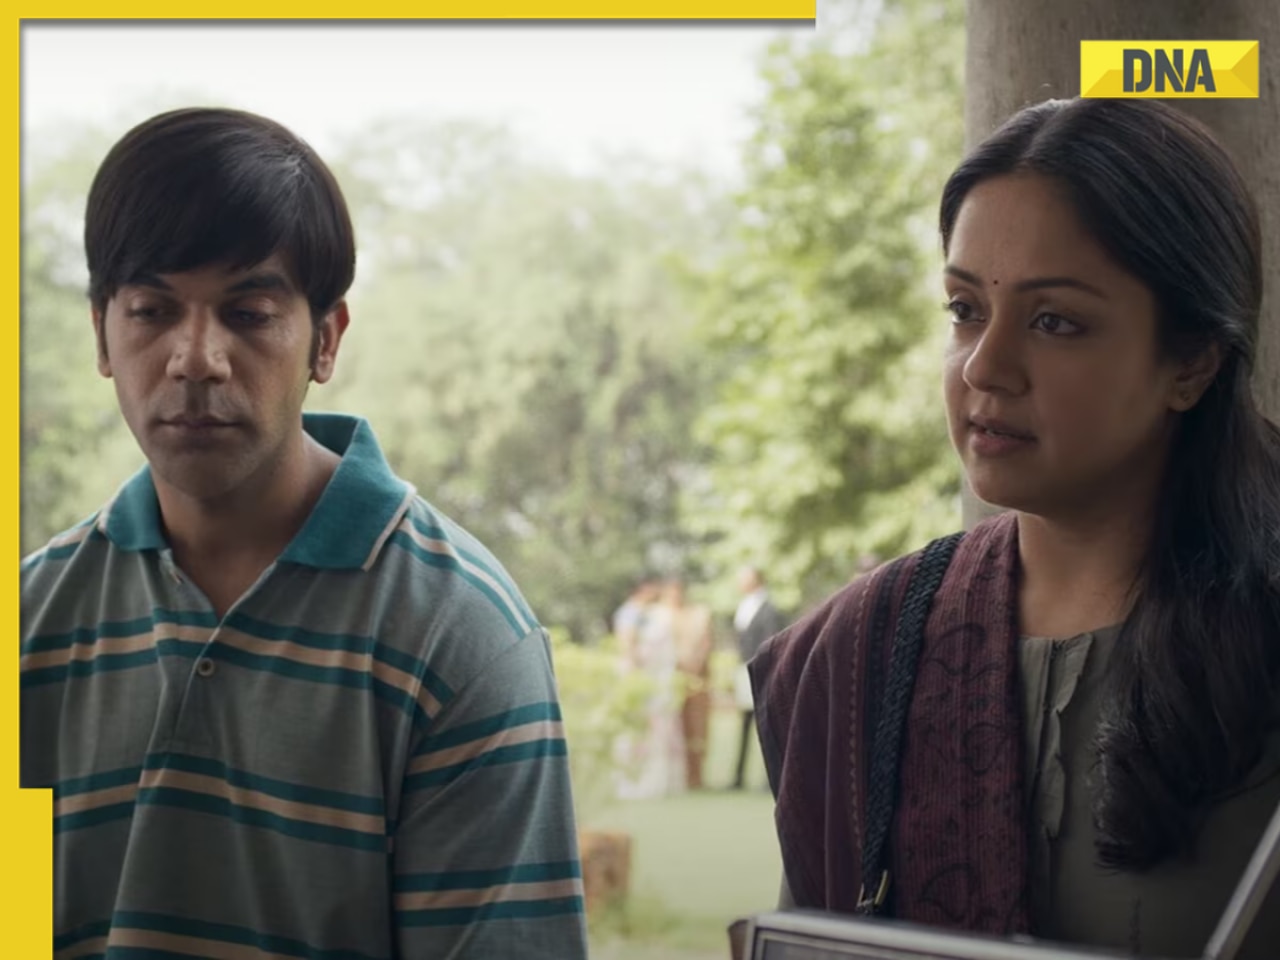 Srikanth box office collection day 3: Rajkummar Rao-starrer continues to grow, beats 12th Fail in opening weekend